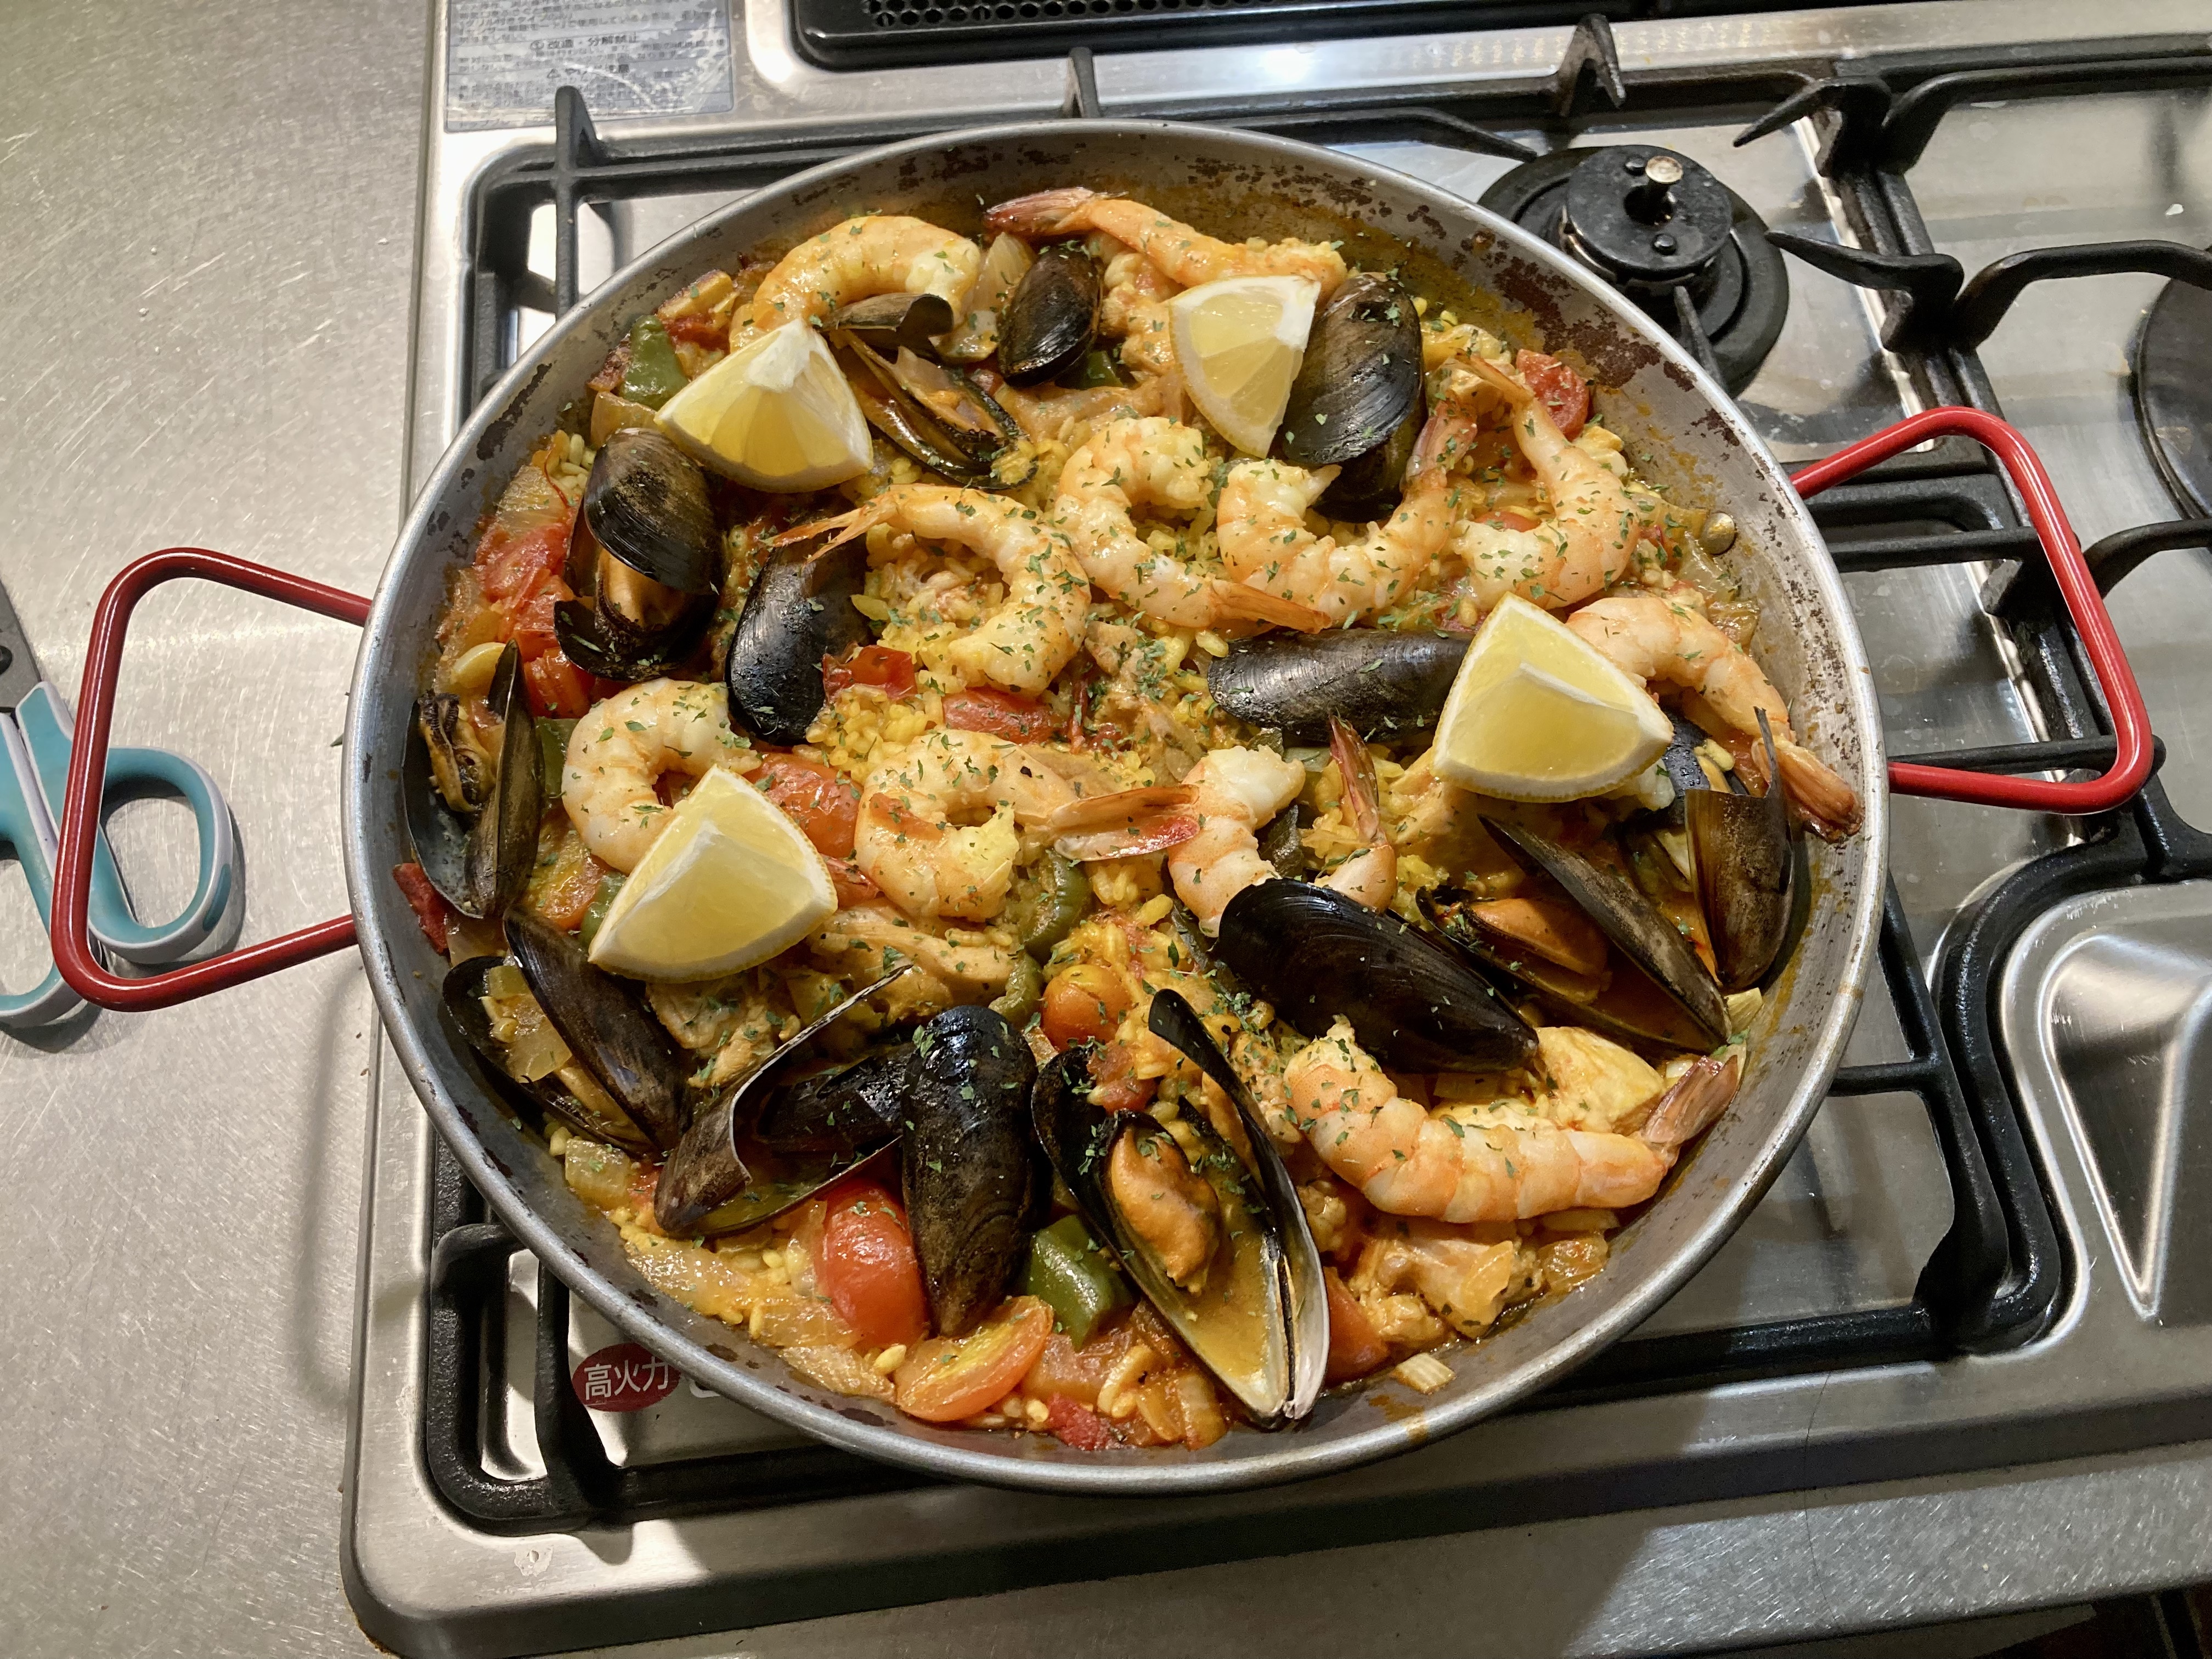 Paella Mixta that I cooked back in Japan